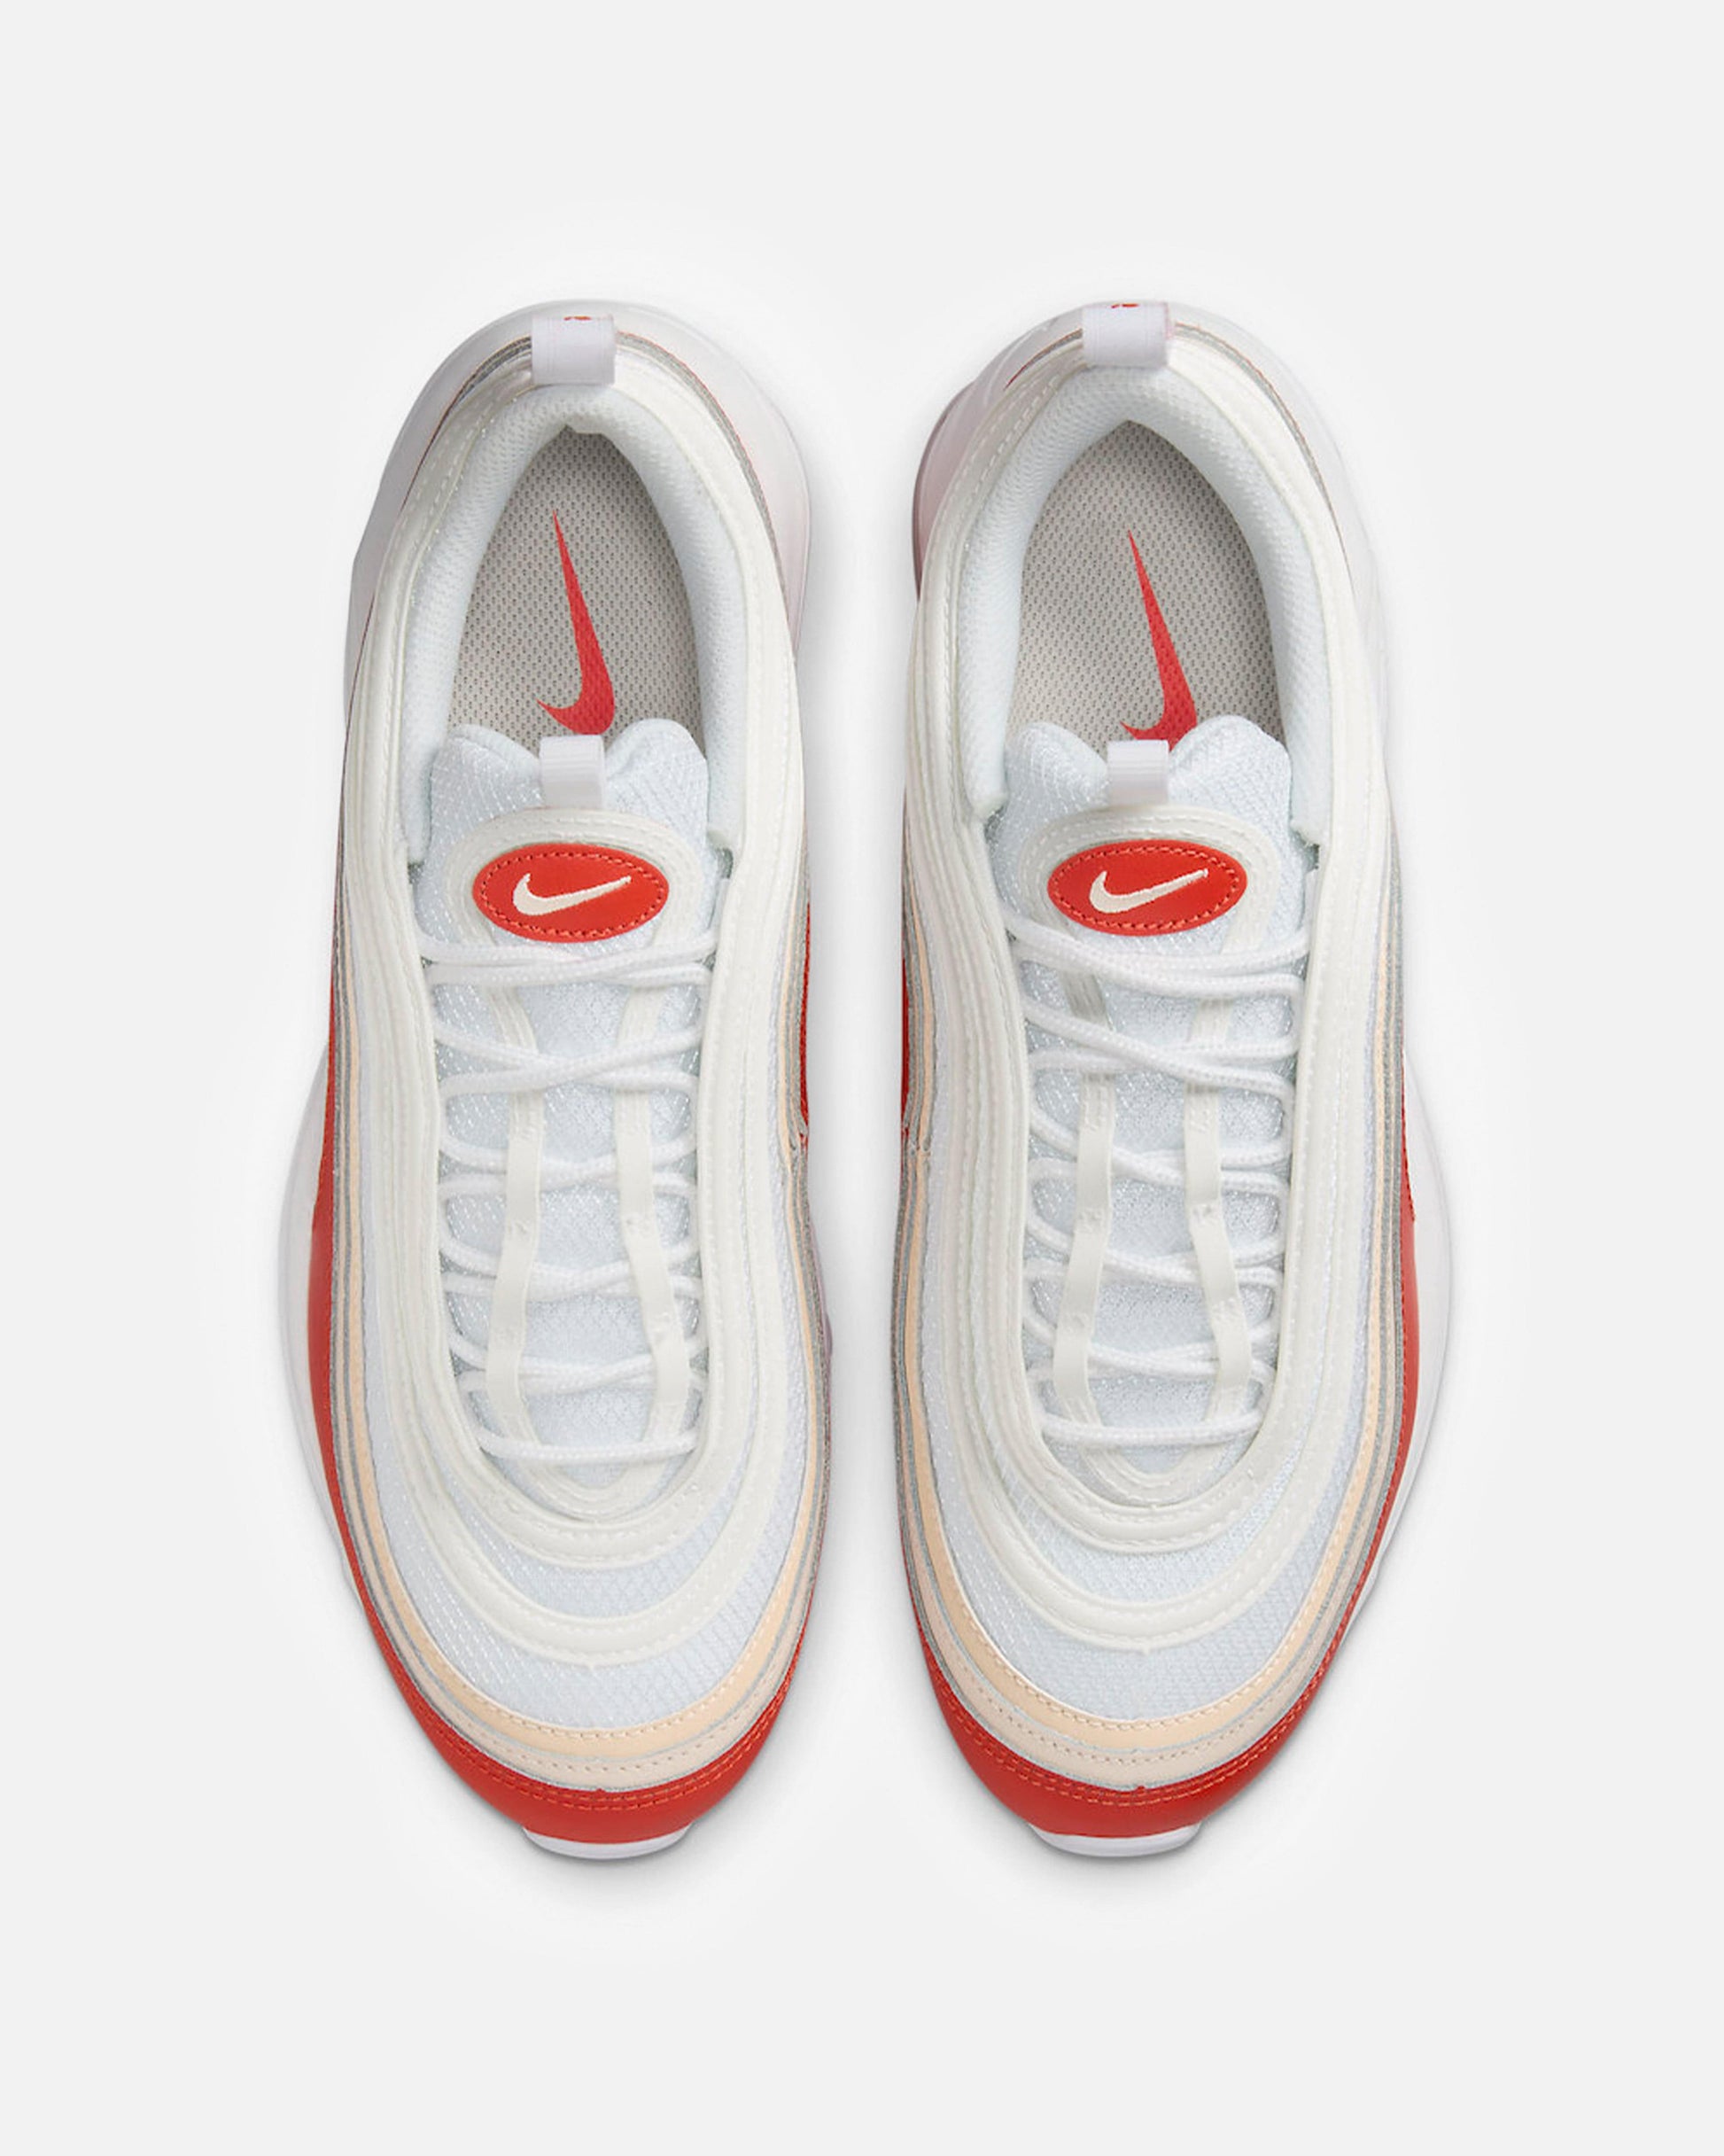 Nike Men's Shoes Air Max 97 'Picante Red'